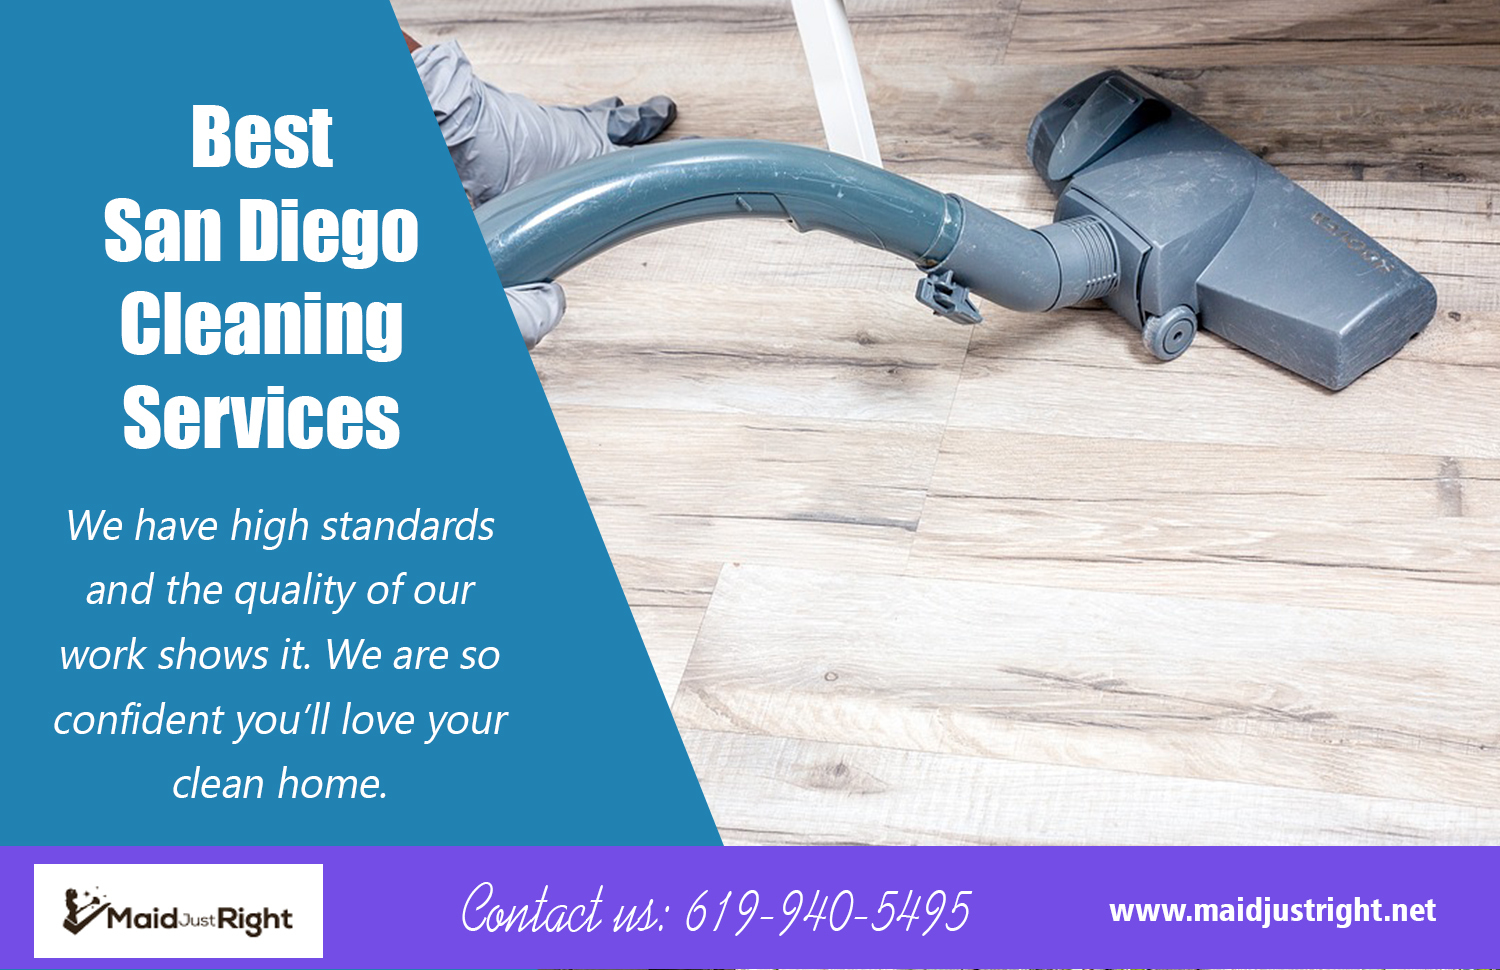 Best San Diego Cleaning Services | Call Us - 619-940-5495 | maidjustright.net